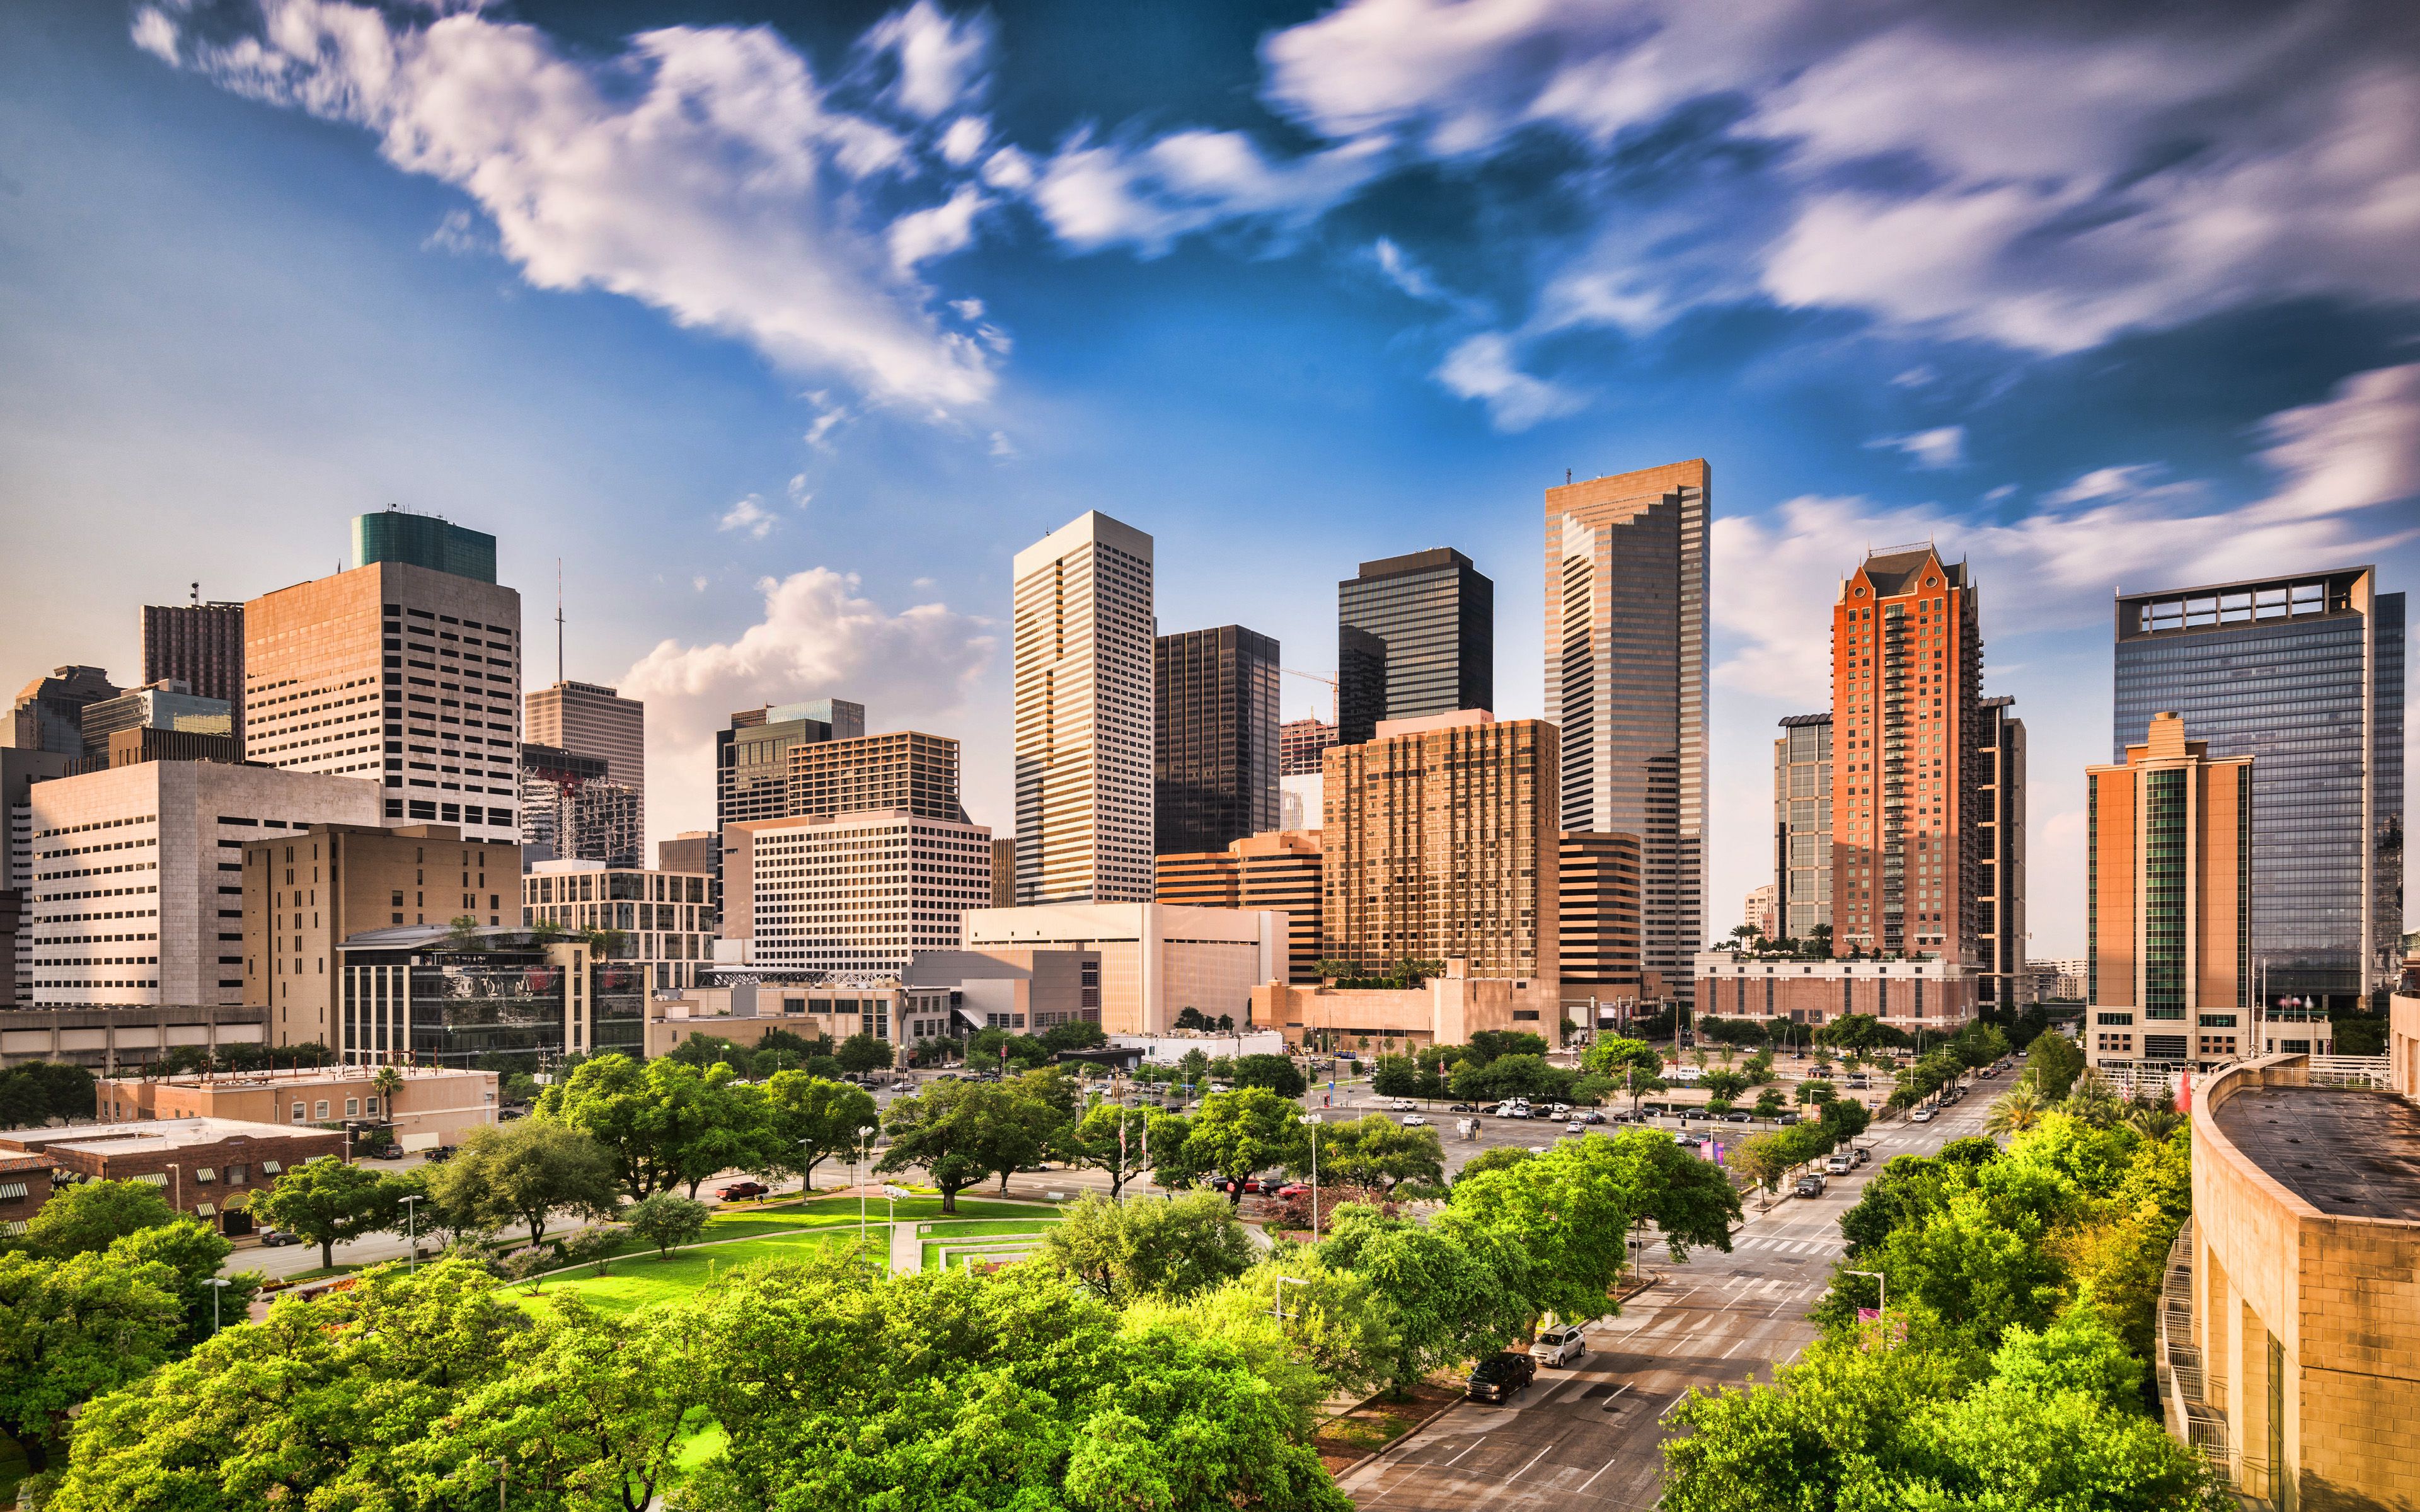 Download wallpaper 4k, Houston, summer, cityscapes, Texas, USA, american cities, America, modern buildings, HDR, City of Houston, Cities of Texas for desktop with resolution 3840x2400. High Quality HD picture wallpaper